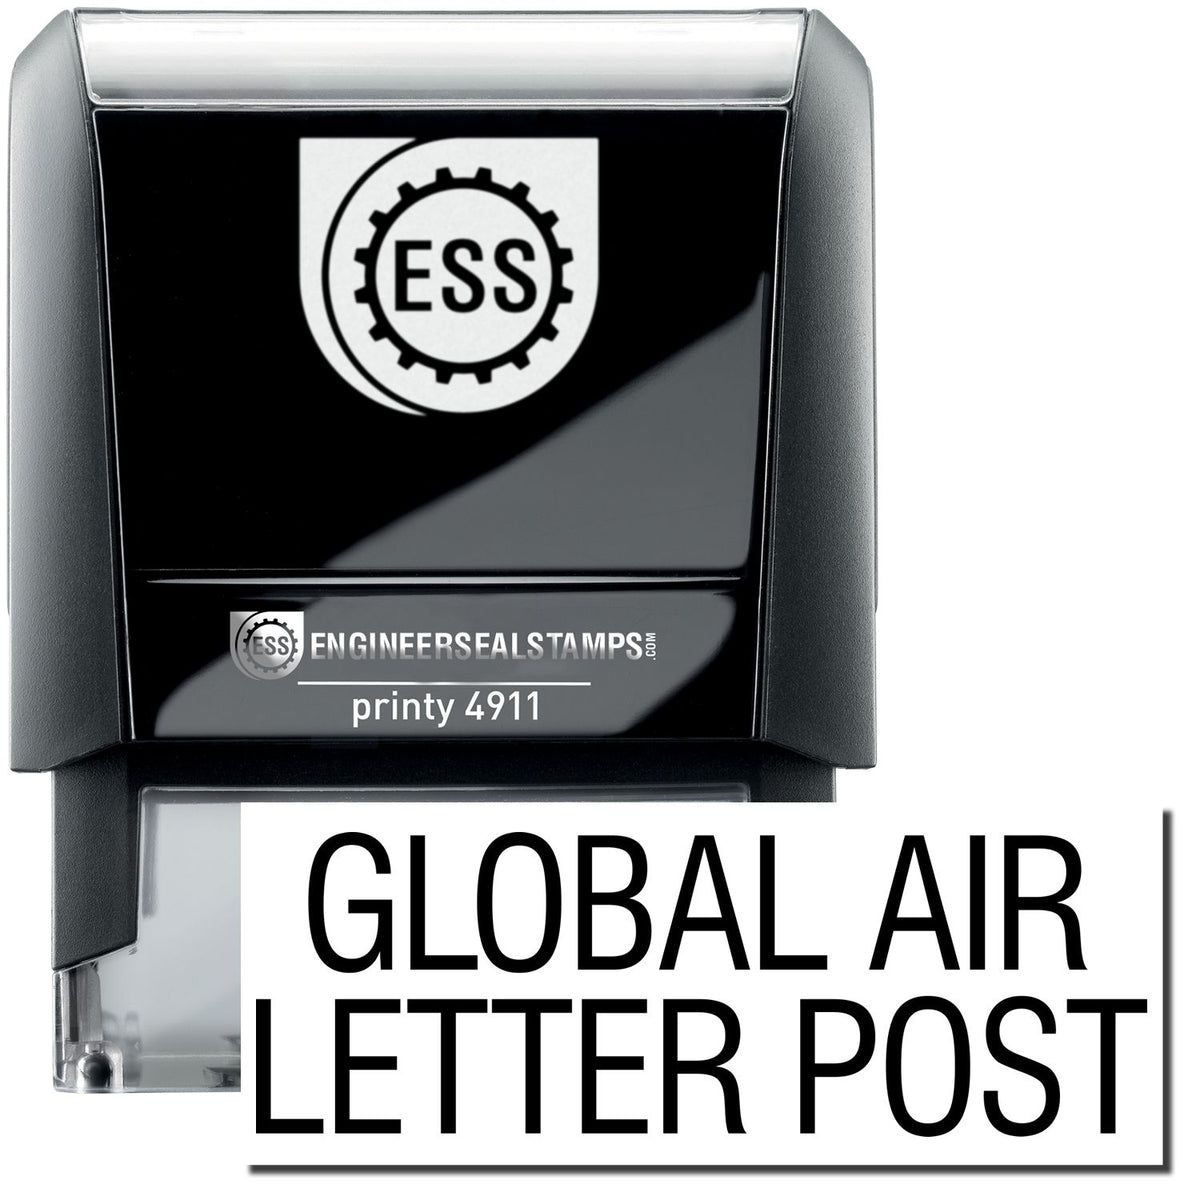 A self-inking stamp with a stamped image showing how the text &quot;GLOBAL AIR LETTER POST&quot; is displayed after stamping.